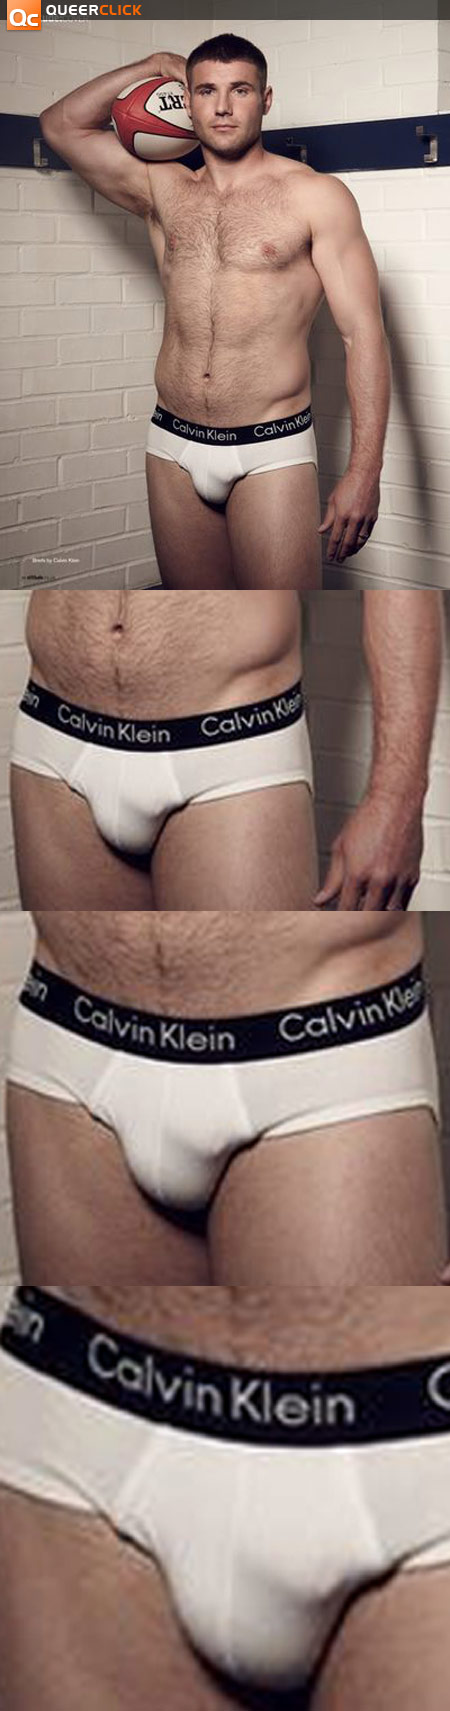 Rugby Player Ben Cohen's Bulge